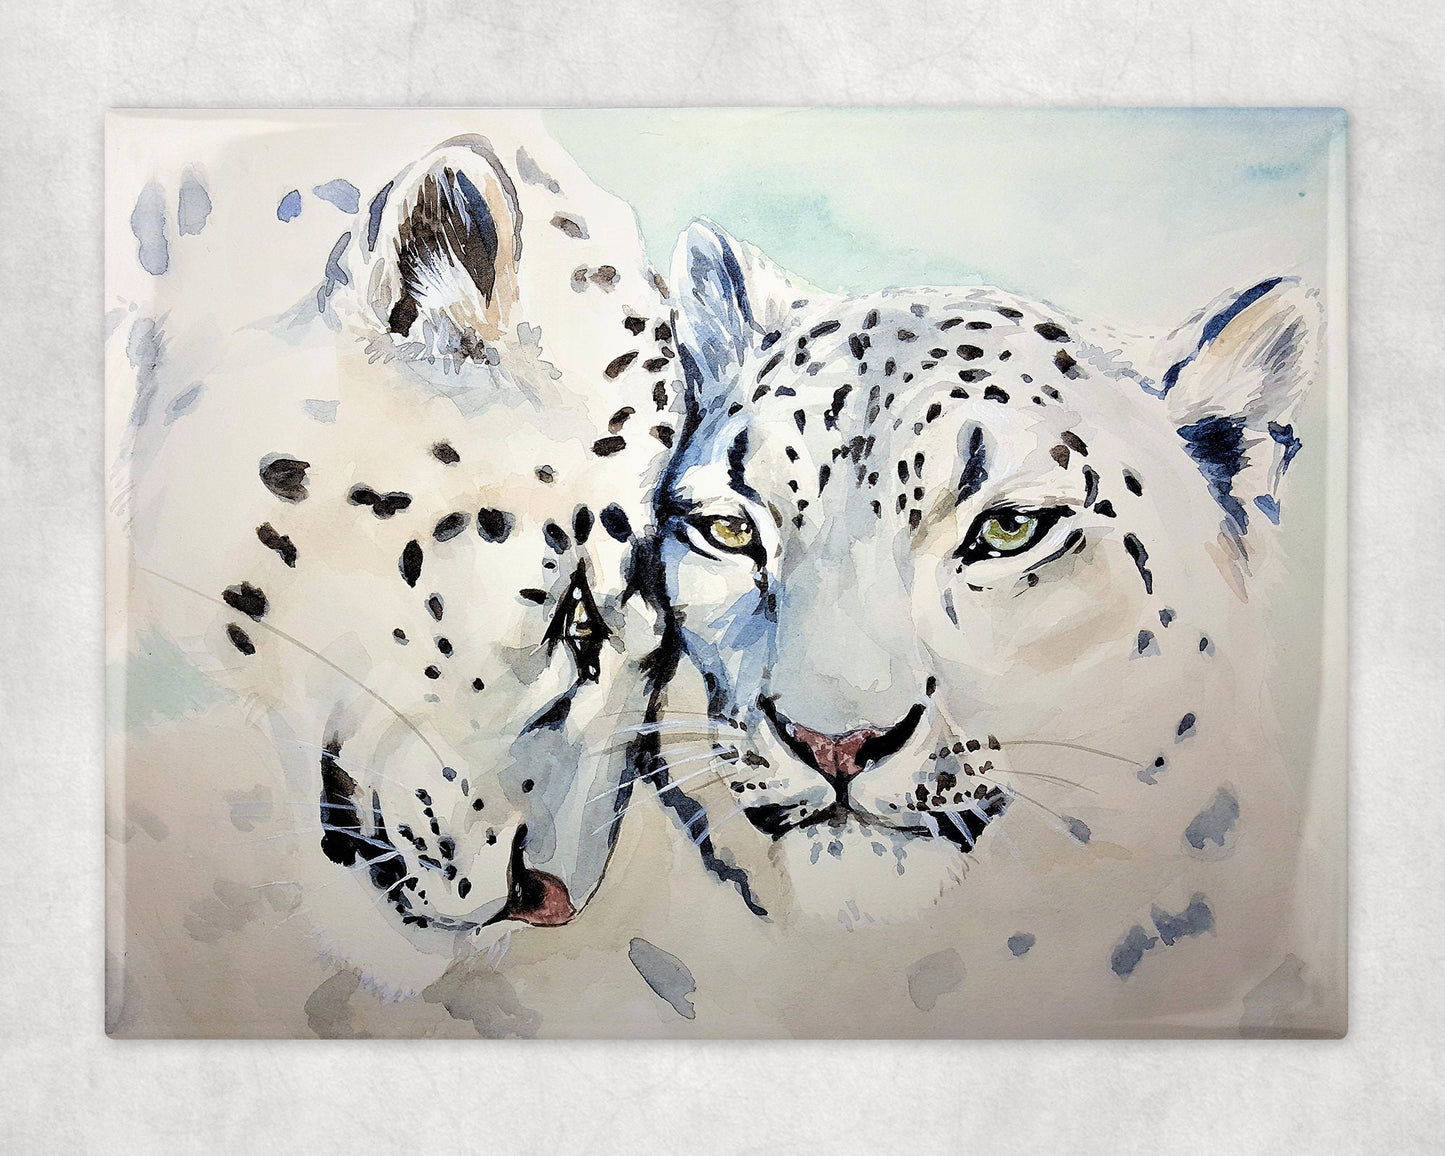 Snow Leopards Art Decorative Ceramic Tile with Optional Easel Back - 6x8 inches